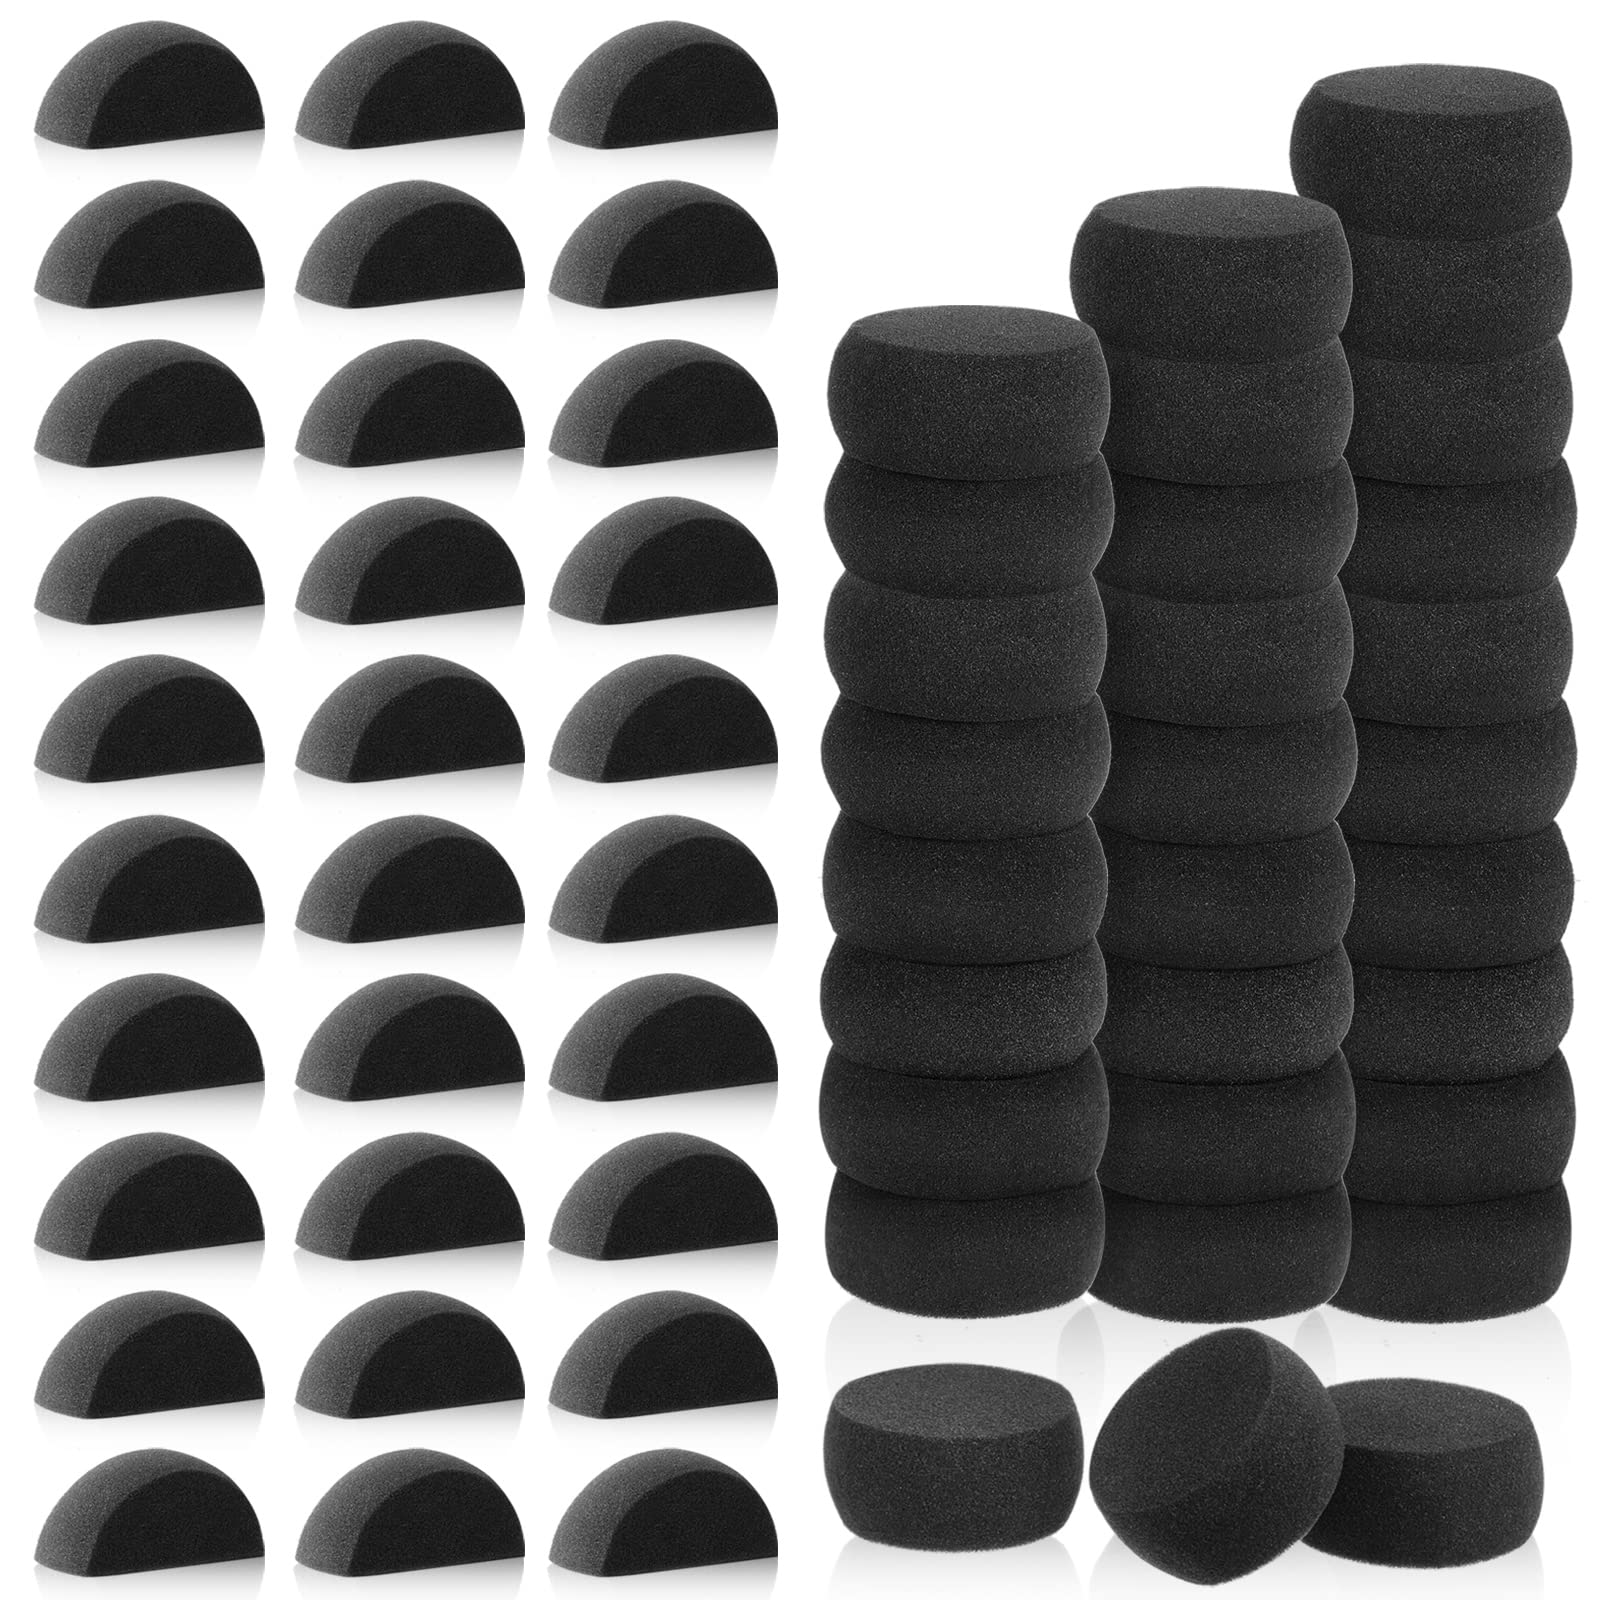 Face Painting Sponges Black Sponge Including Round Half Moon for Makeup  Crafts Art Work Sculpting Pottery Body Painting (60 Pcs)